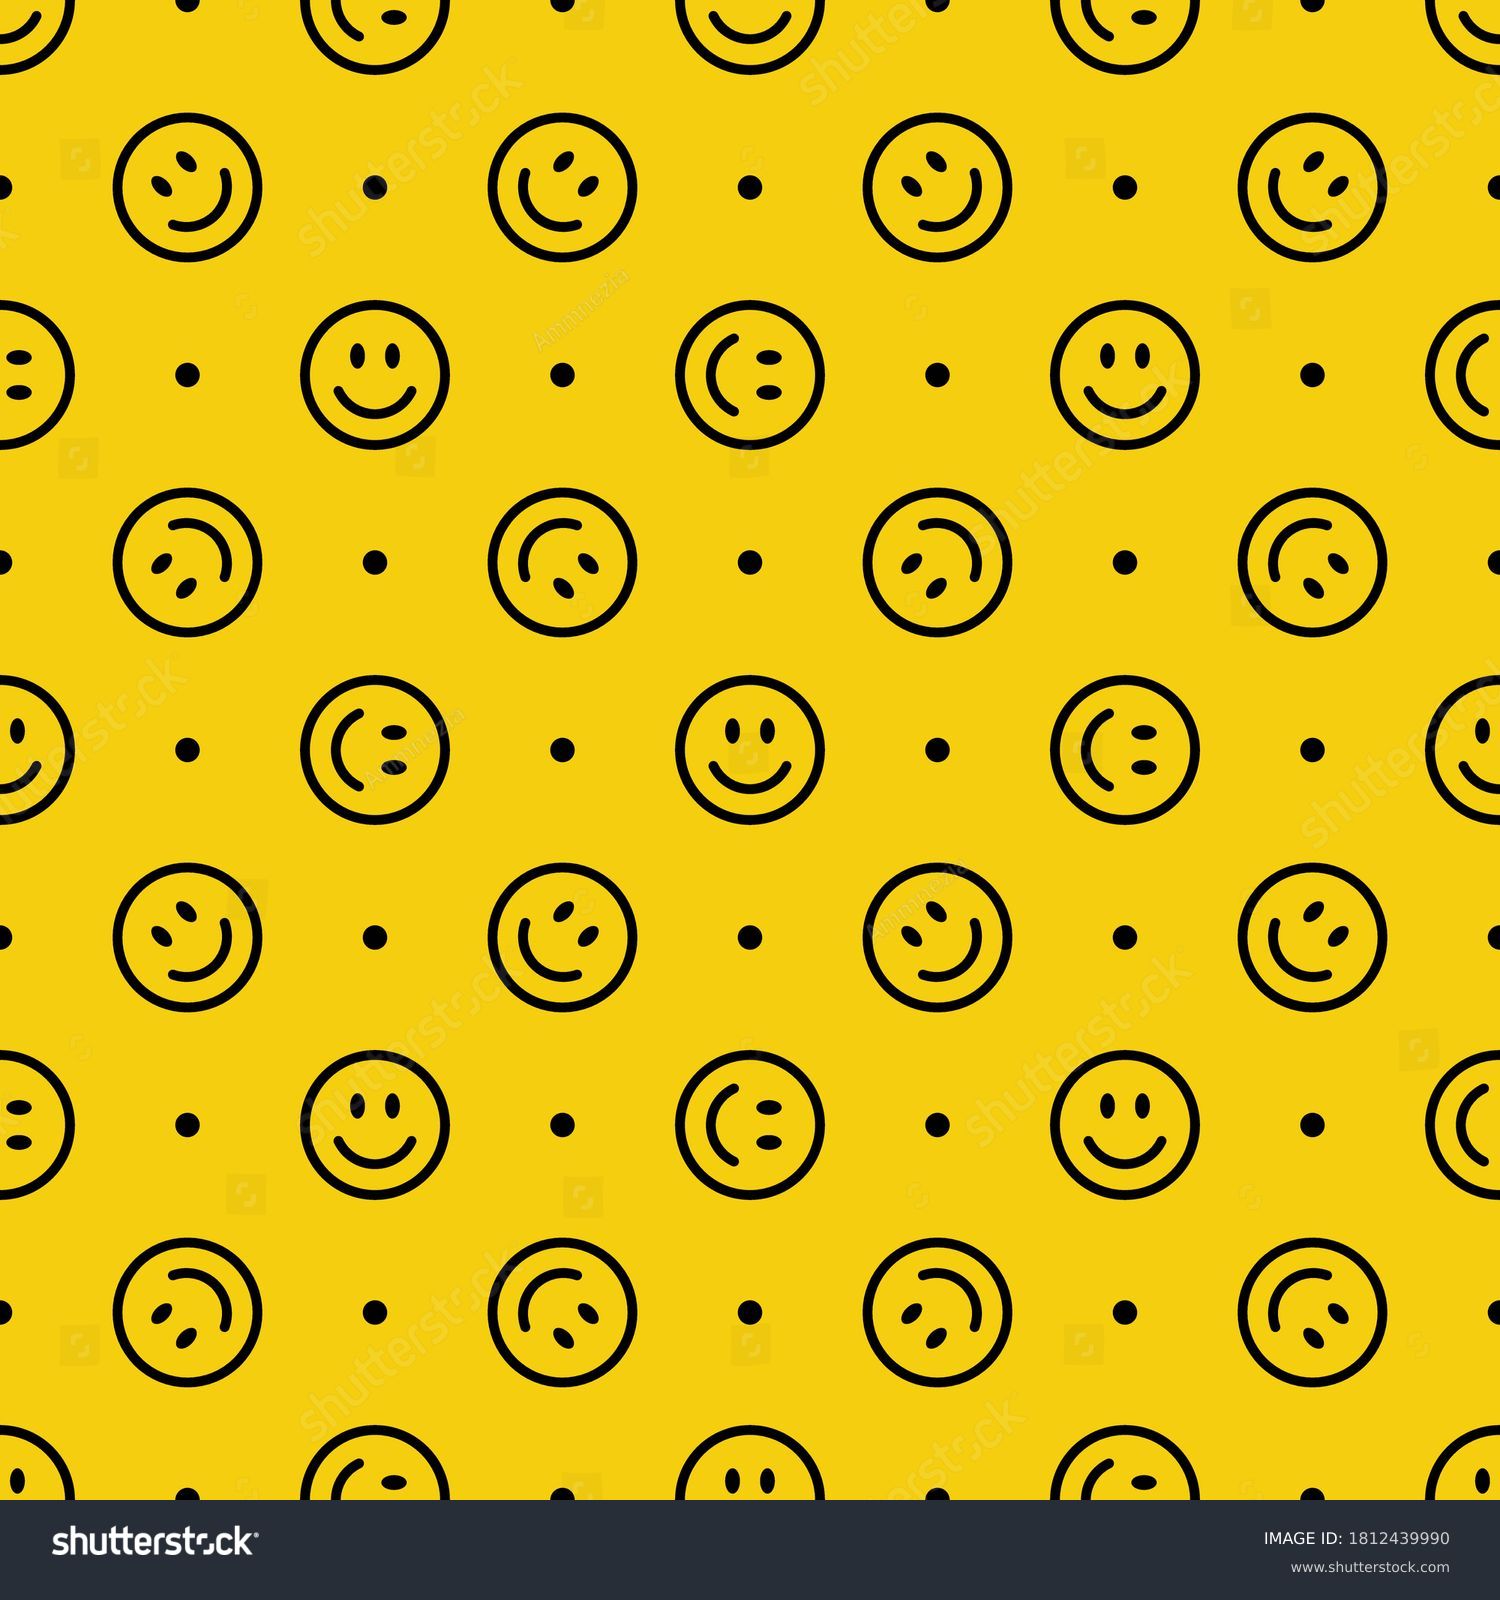 Wallpaper Black Emoticons Image Stock Photos 3d Objects